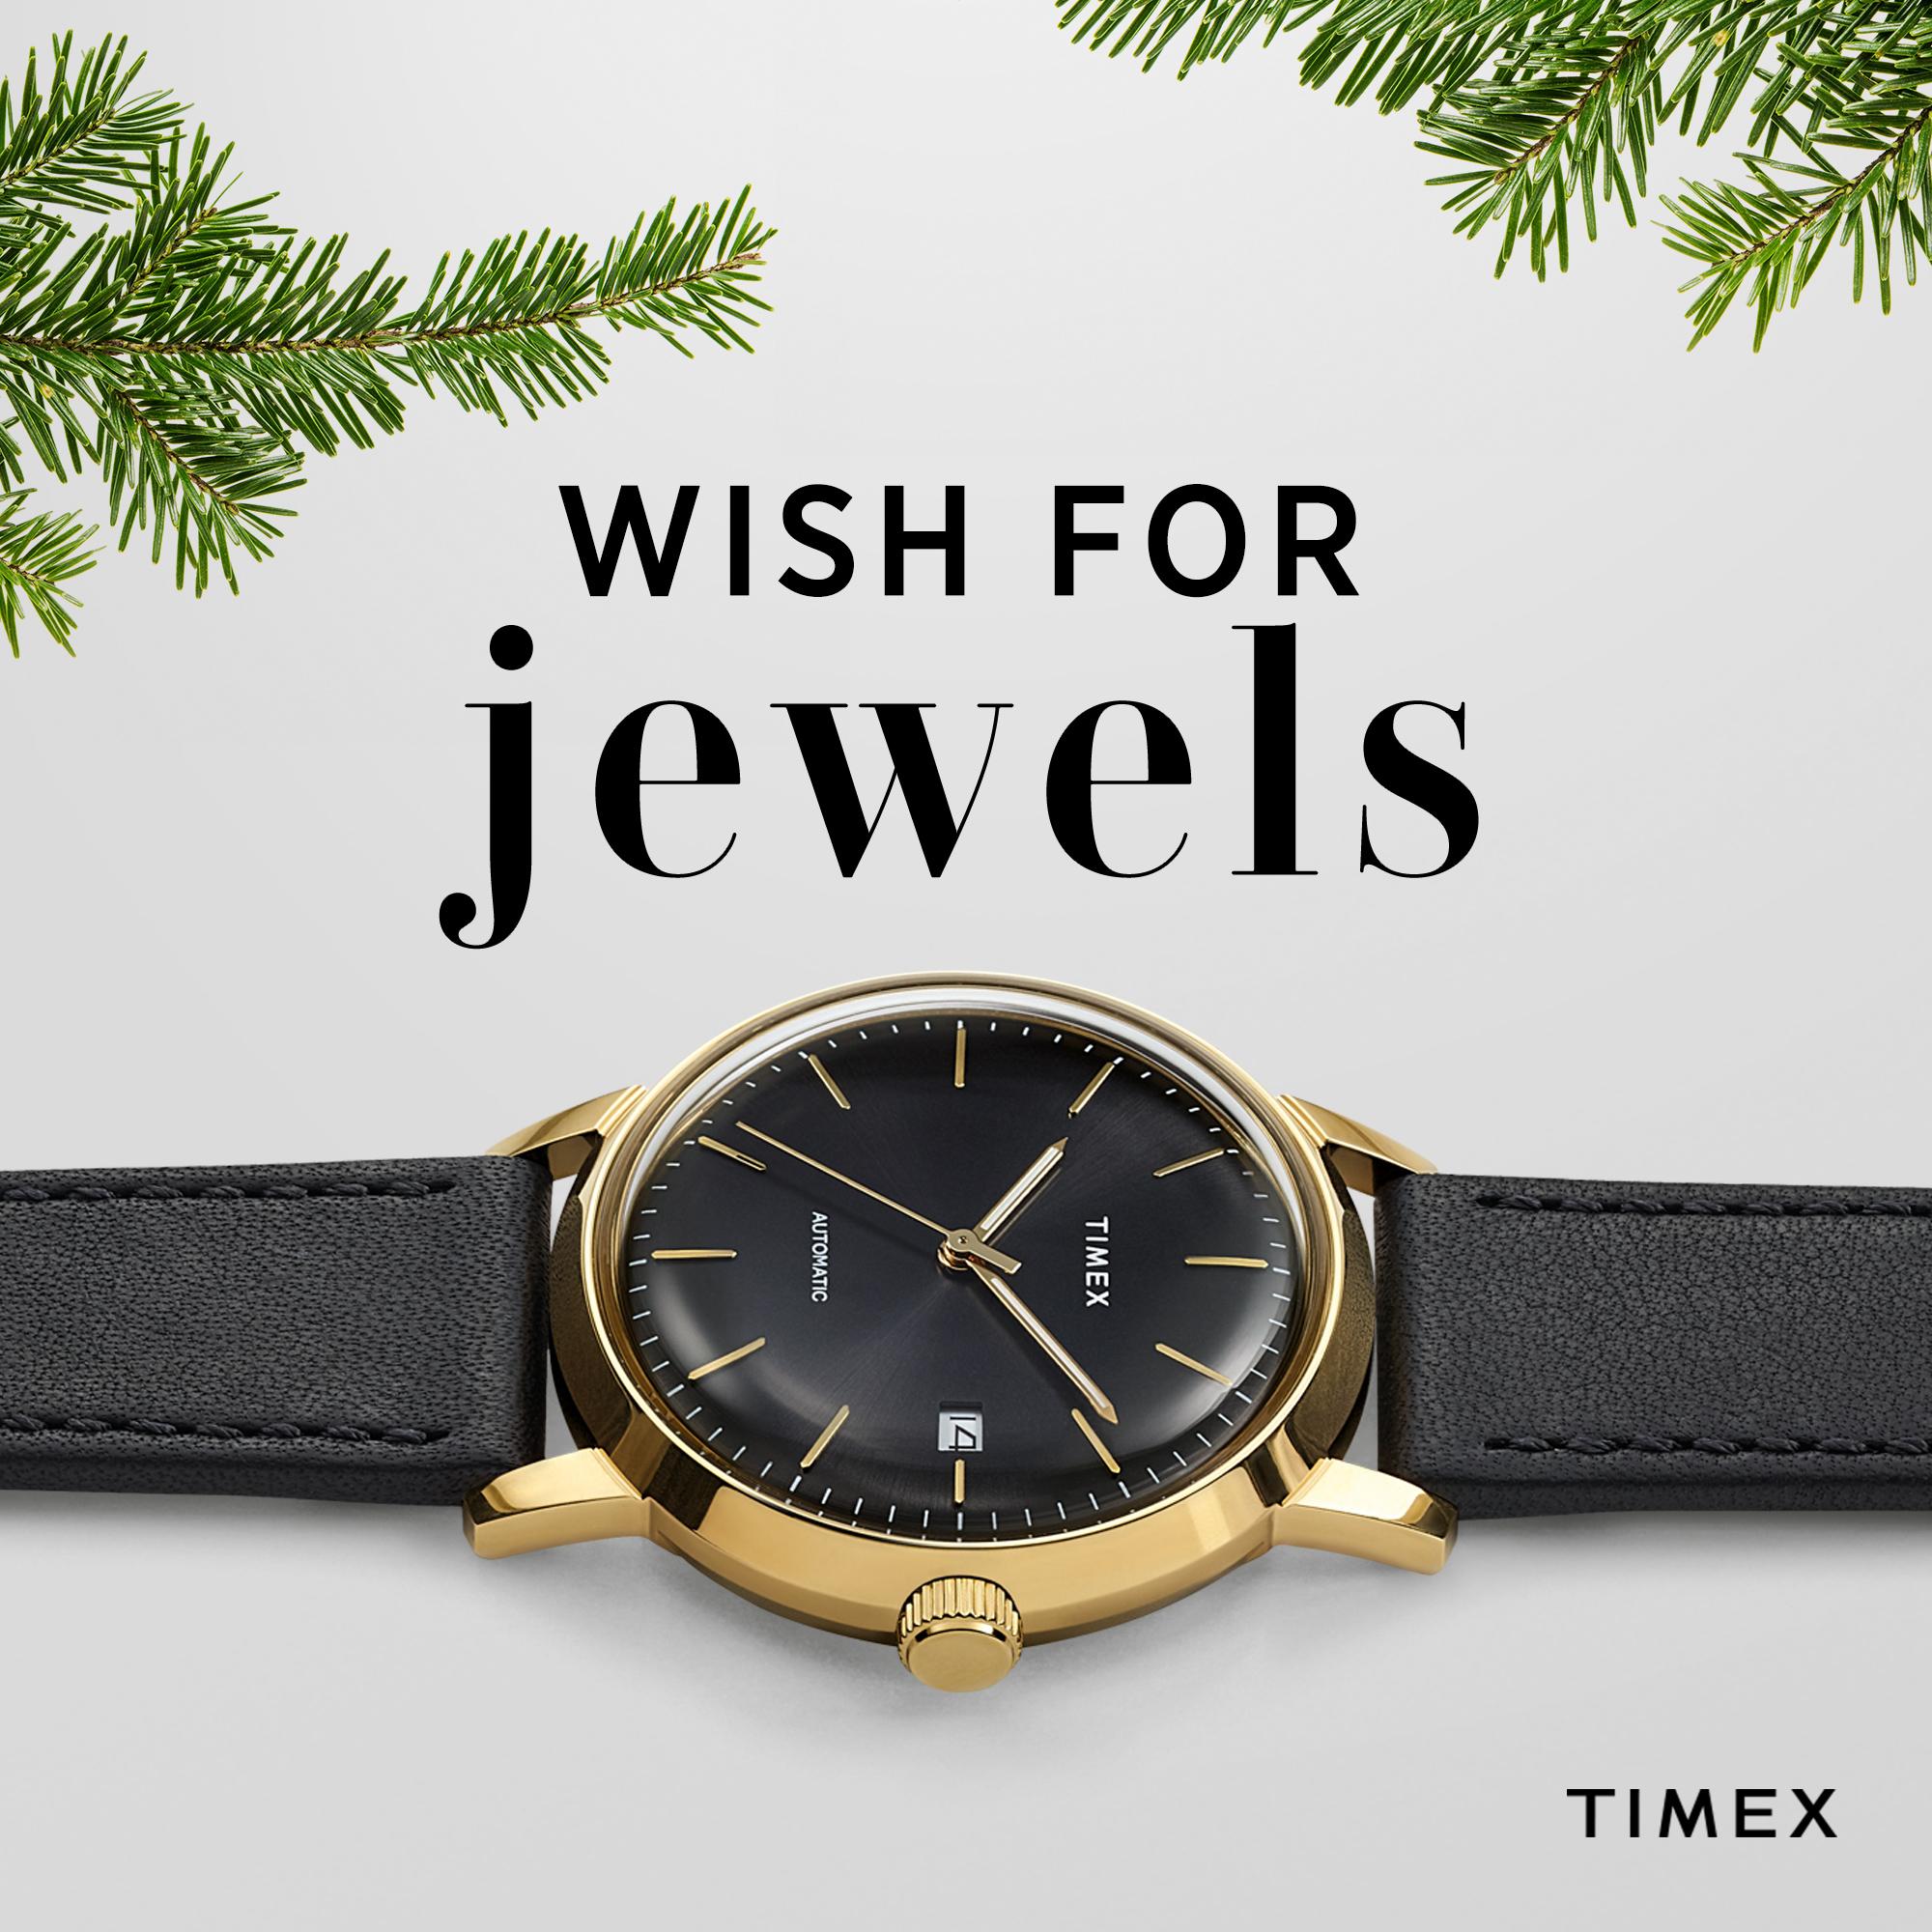 Opvoeding Perforatie zo veel Timex on Twitter: "#WishFor #jewels 💎 Click the link to shop. ⌚: Marlin®  Automatic 40mm Leather Strap | TW2T22800 https://t.co/28tI5KVS99  https://t.co/litZ8esxH2" / Twitter